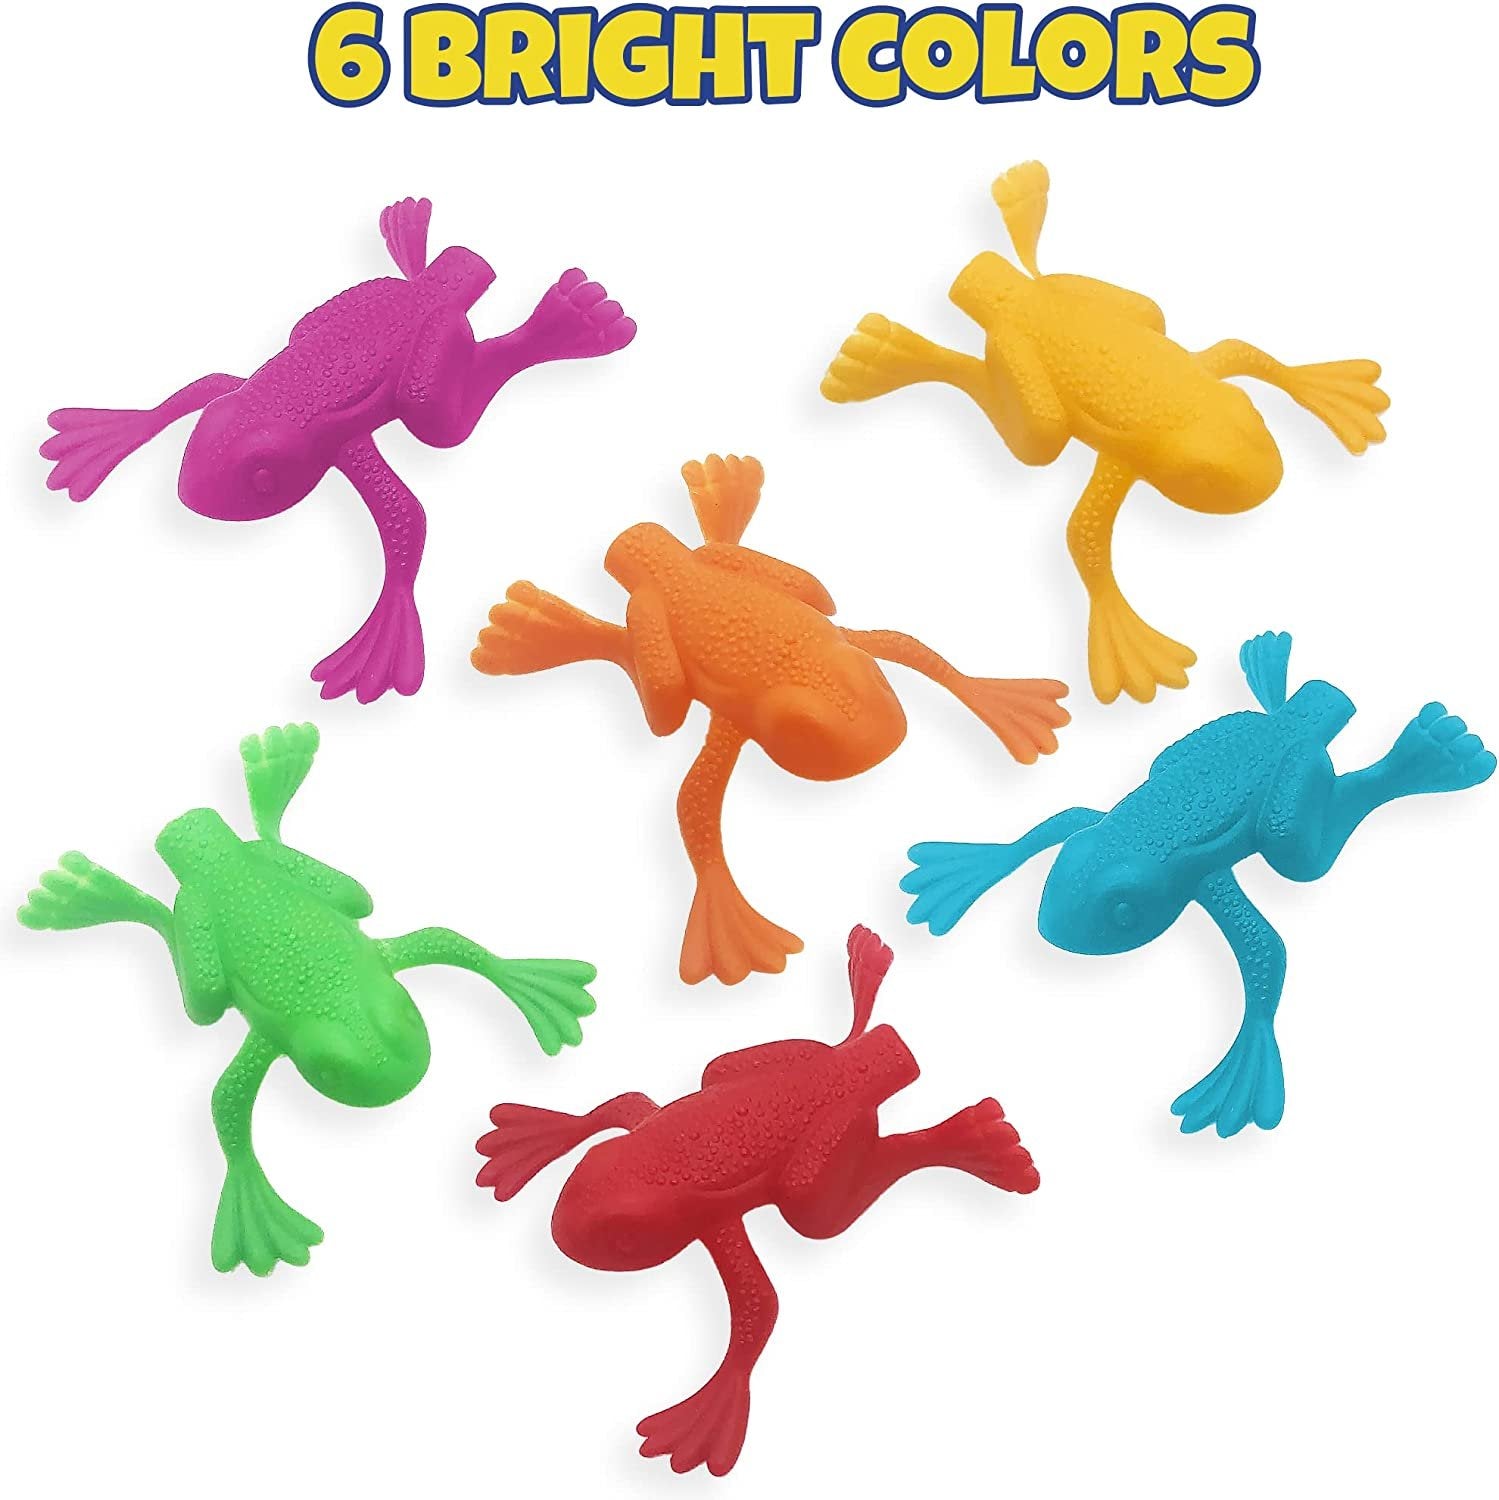 Jump n Leap Frog Toy - 130 Pack of 2" Assorted Colors, Cool Jumping Frogs for Kids - Vibrant Color Variety - Fun Party Favors, Goody Bag Fillers, Contest Prizes for Girls and Boys